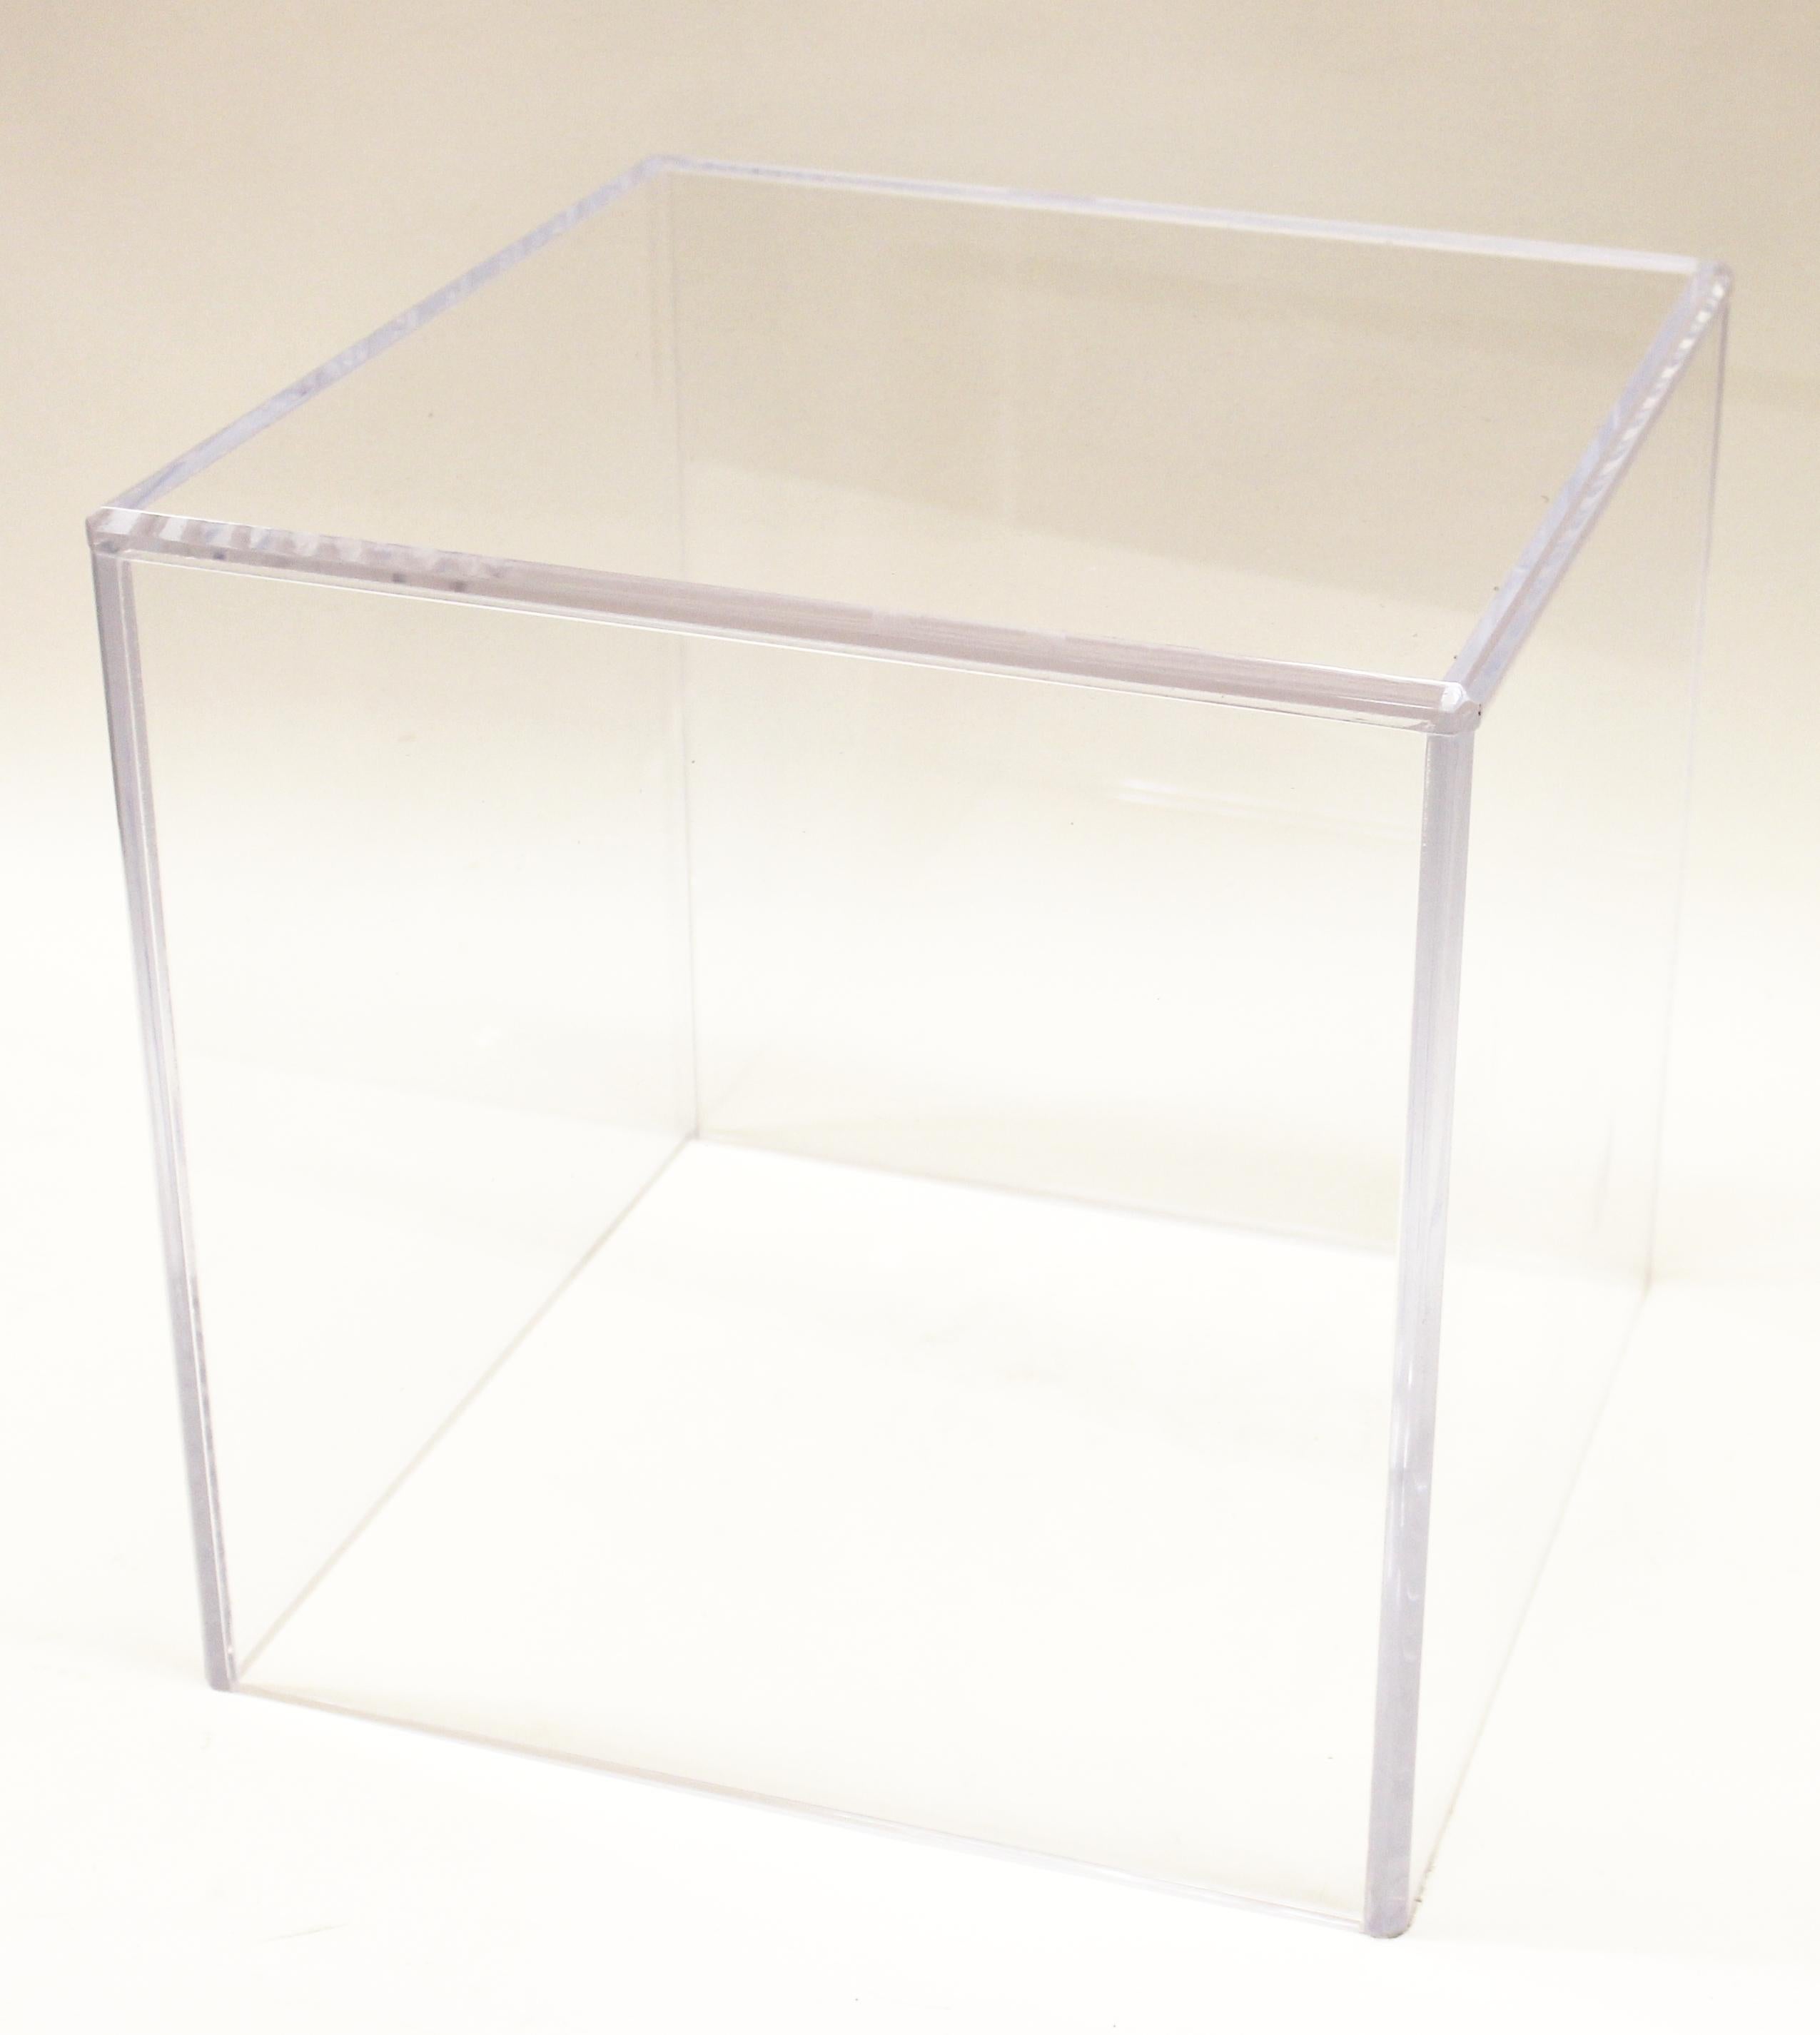 Acrylique The Moderns Acrylic Display Pedestal Cubes or Side Tables